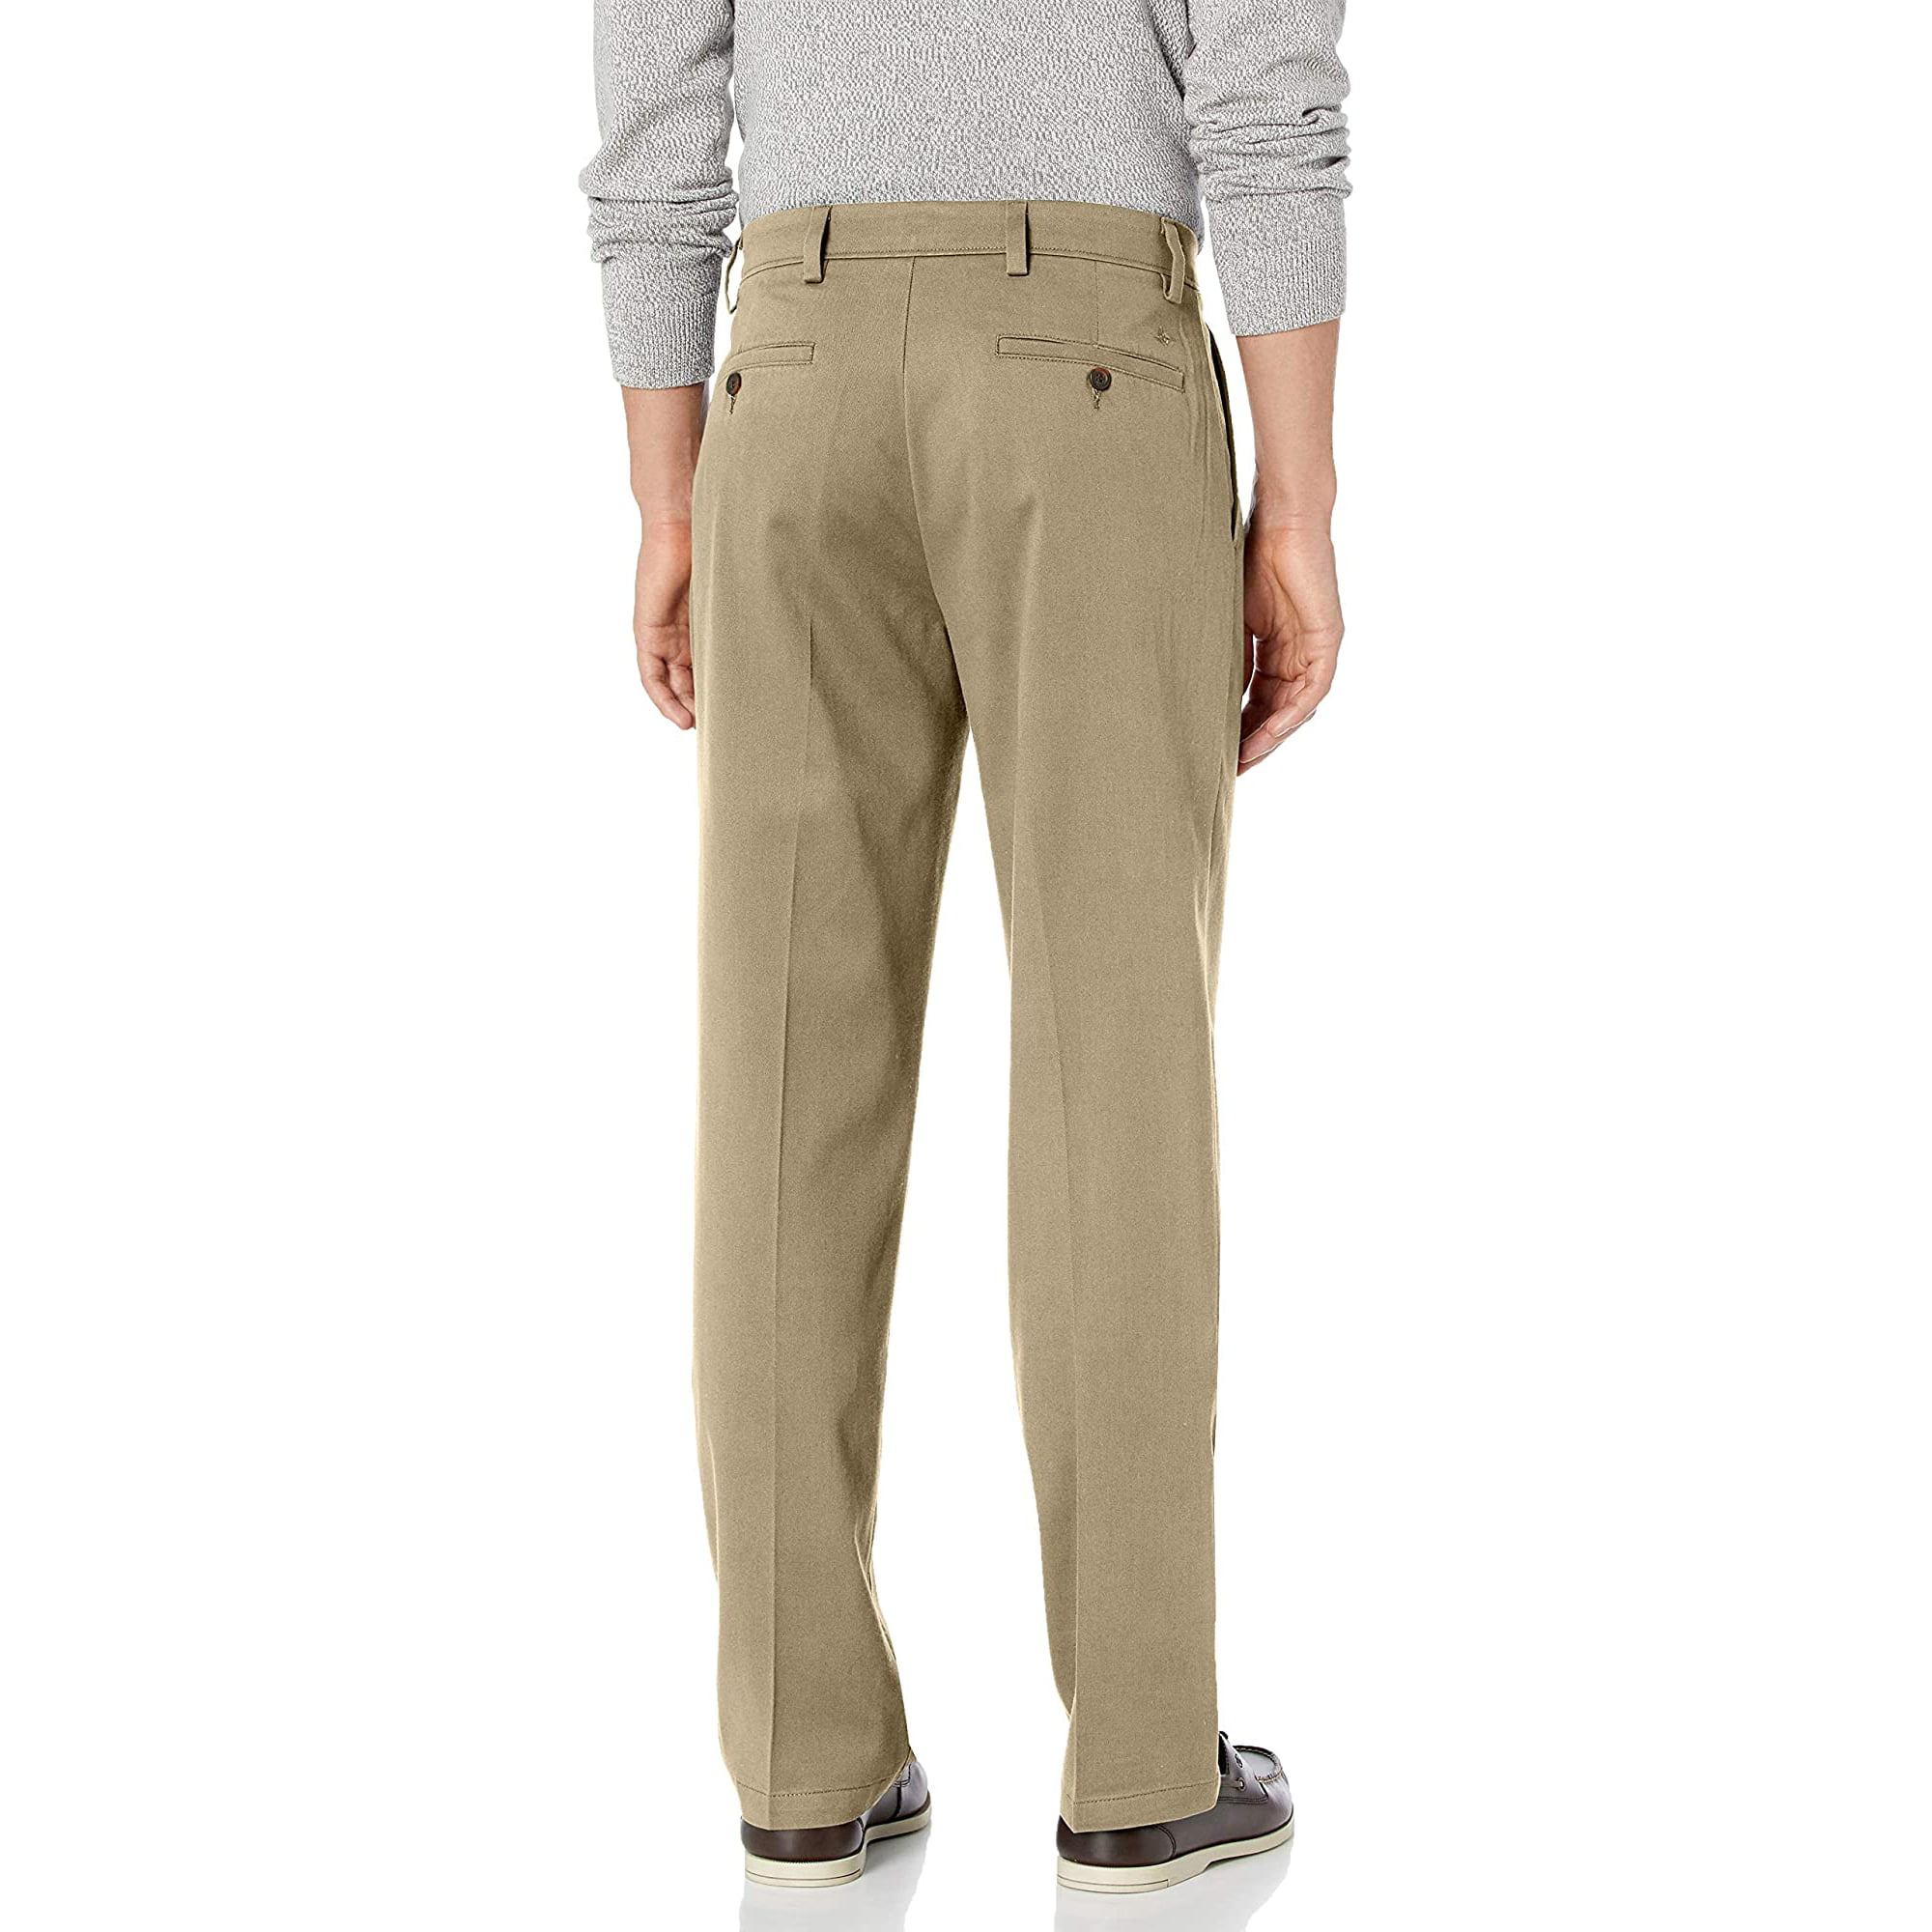 SEE INSEAM,NWT Style 32895- Men's Dockers Easy Khaki Classic-Fit Pleated Pants